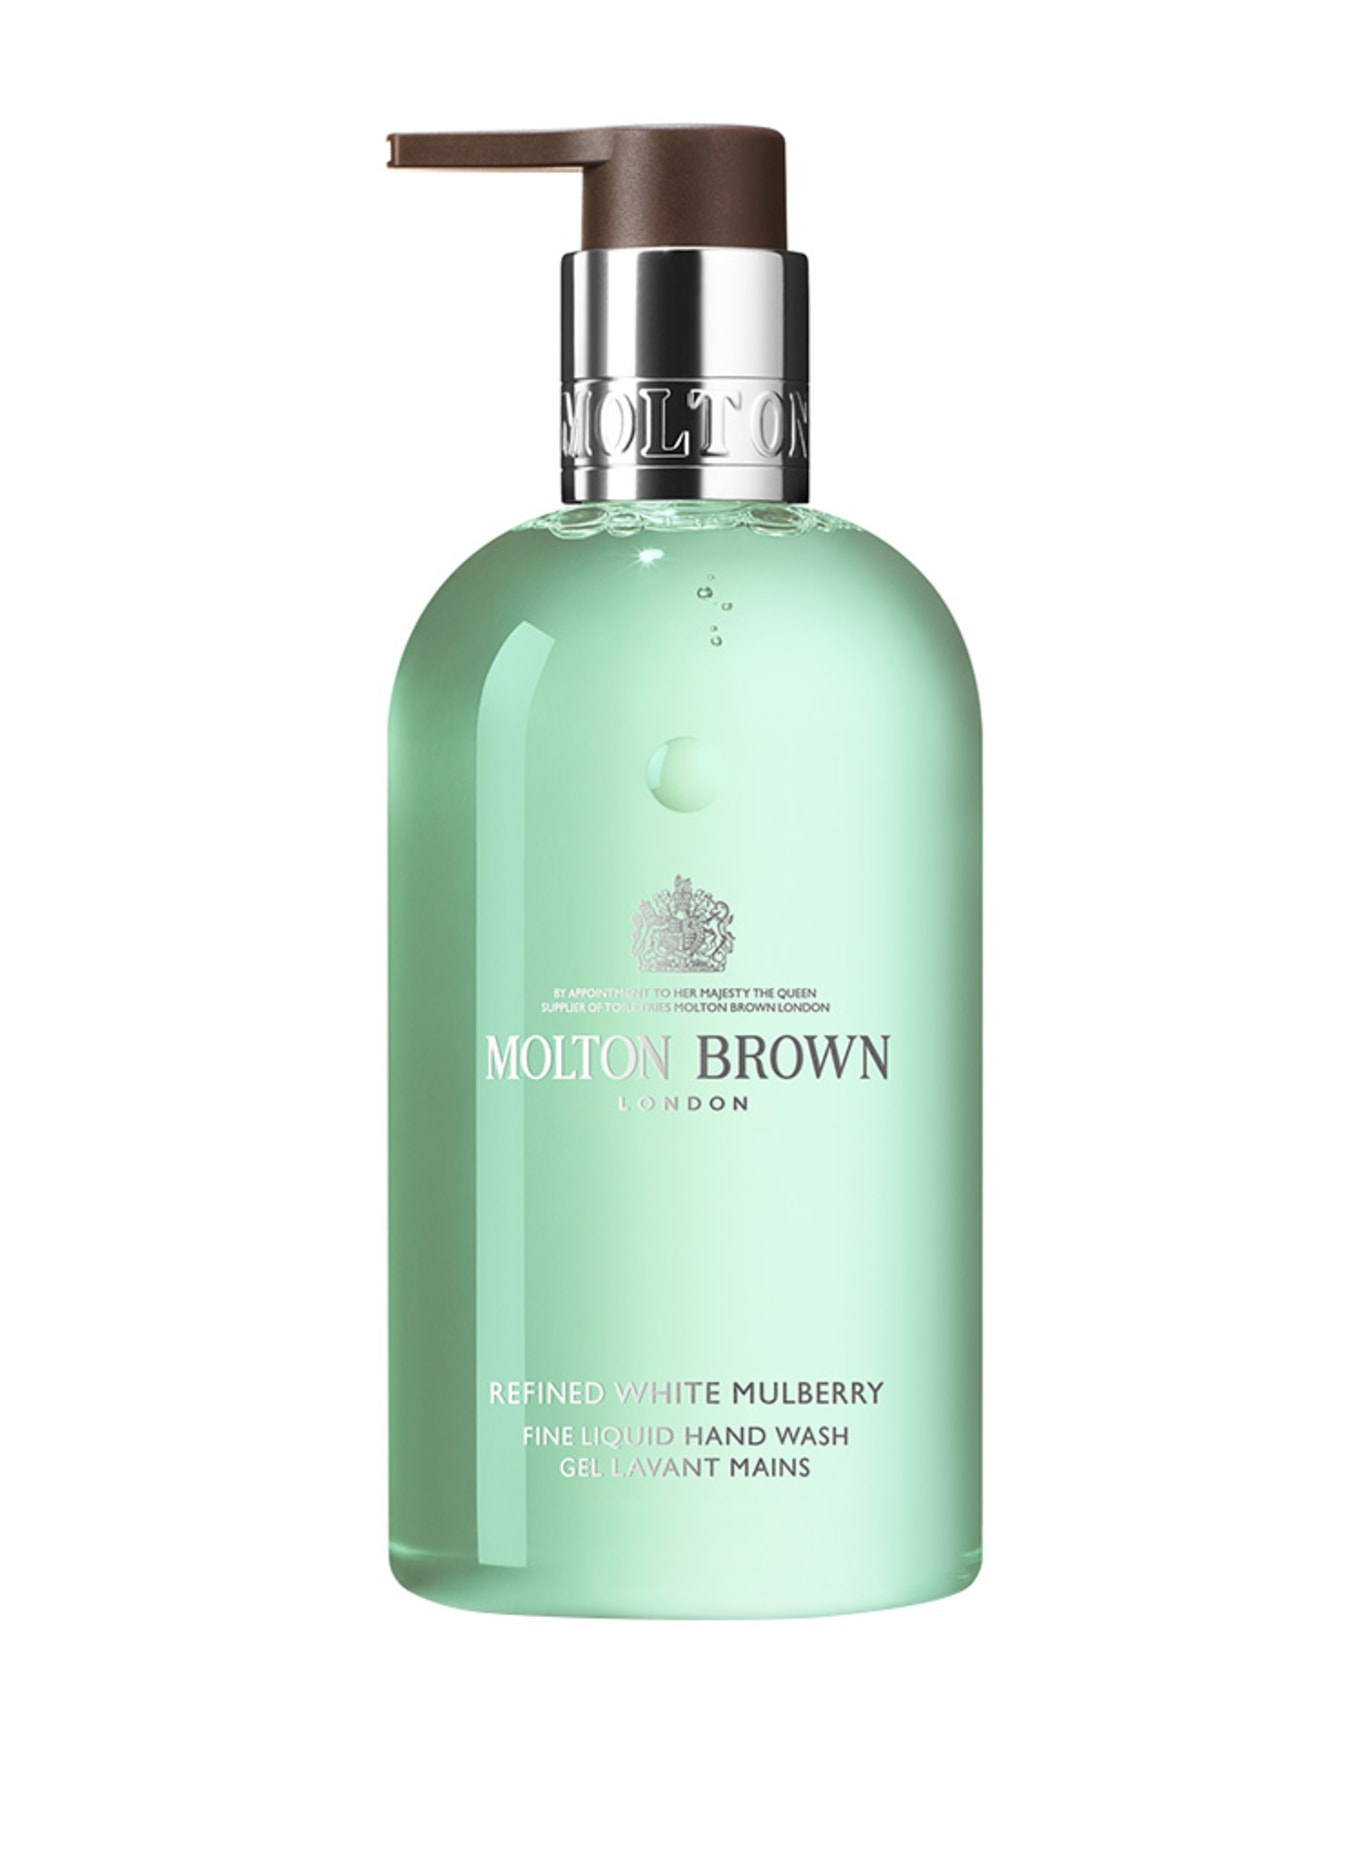 MOLTON BROWN REFINED WHITE MULBERRY (Obrázek 1)